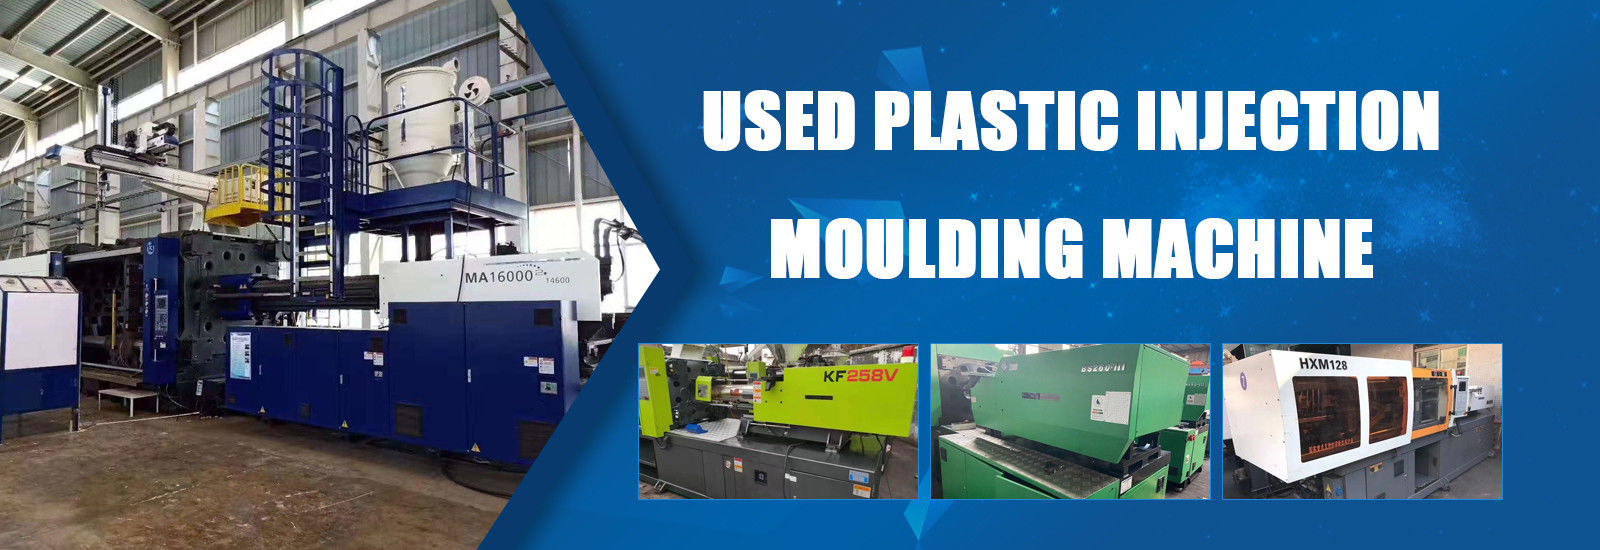 calidad Chen Hsong Injection Molding Machine fábrica